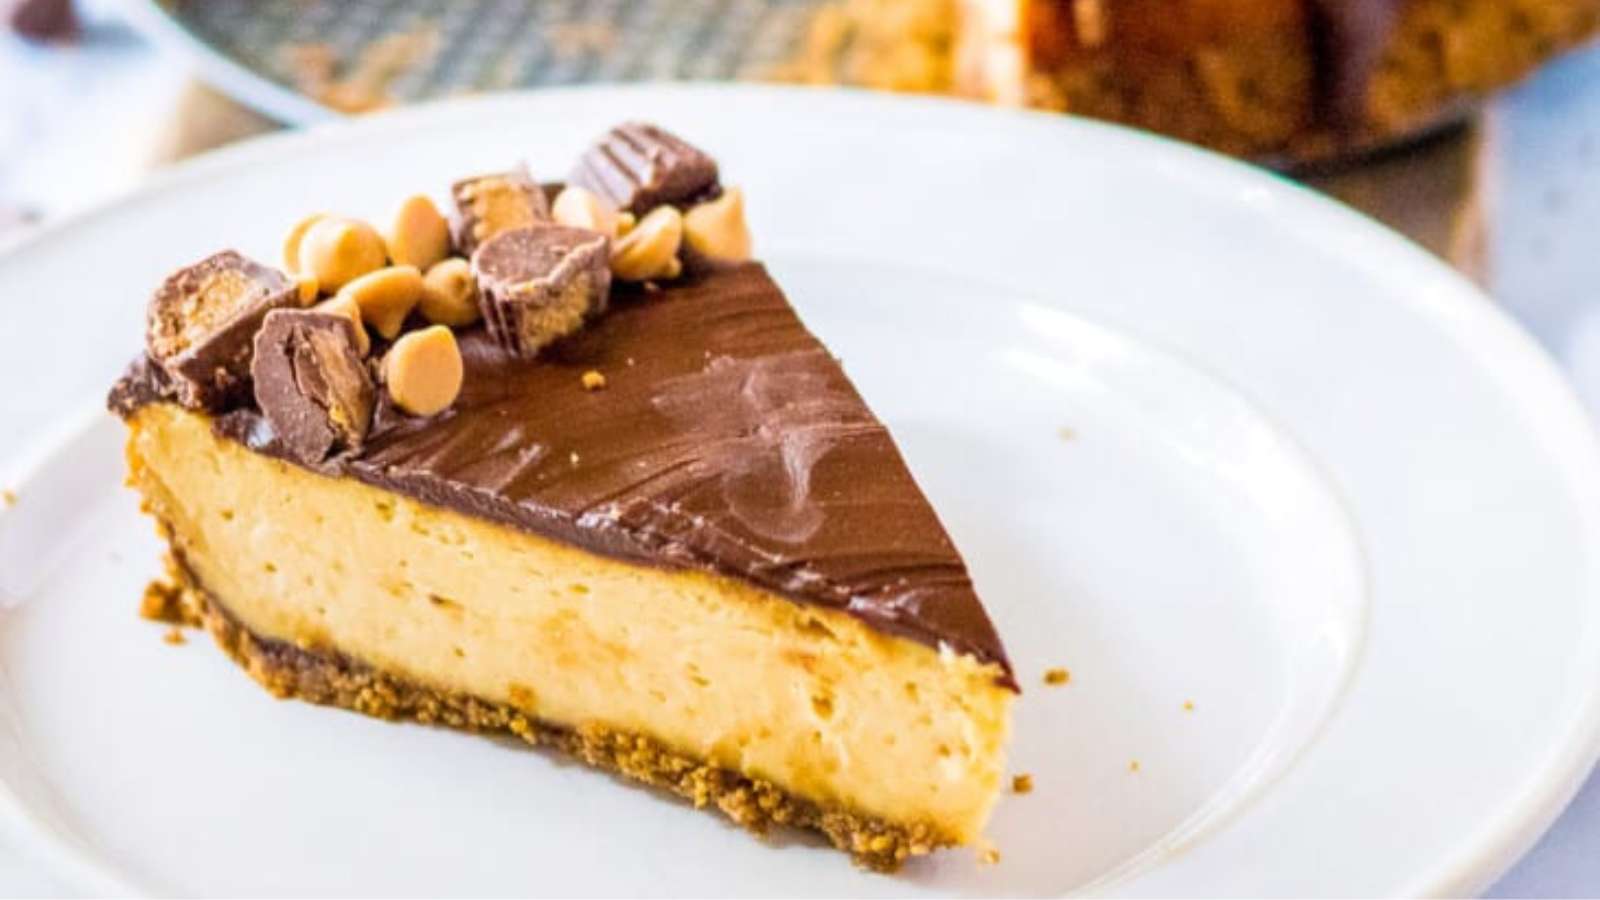 Peanut Butter Cup Cheesecake recipe by Julie’s Eats and Treats.